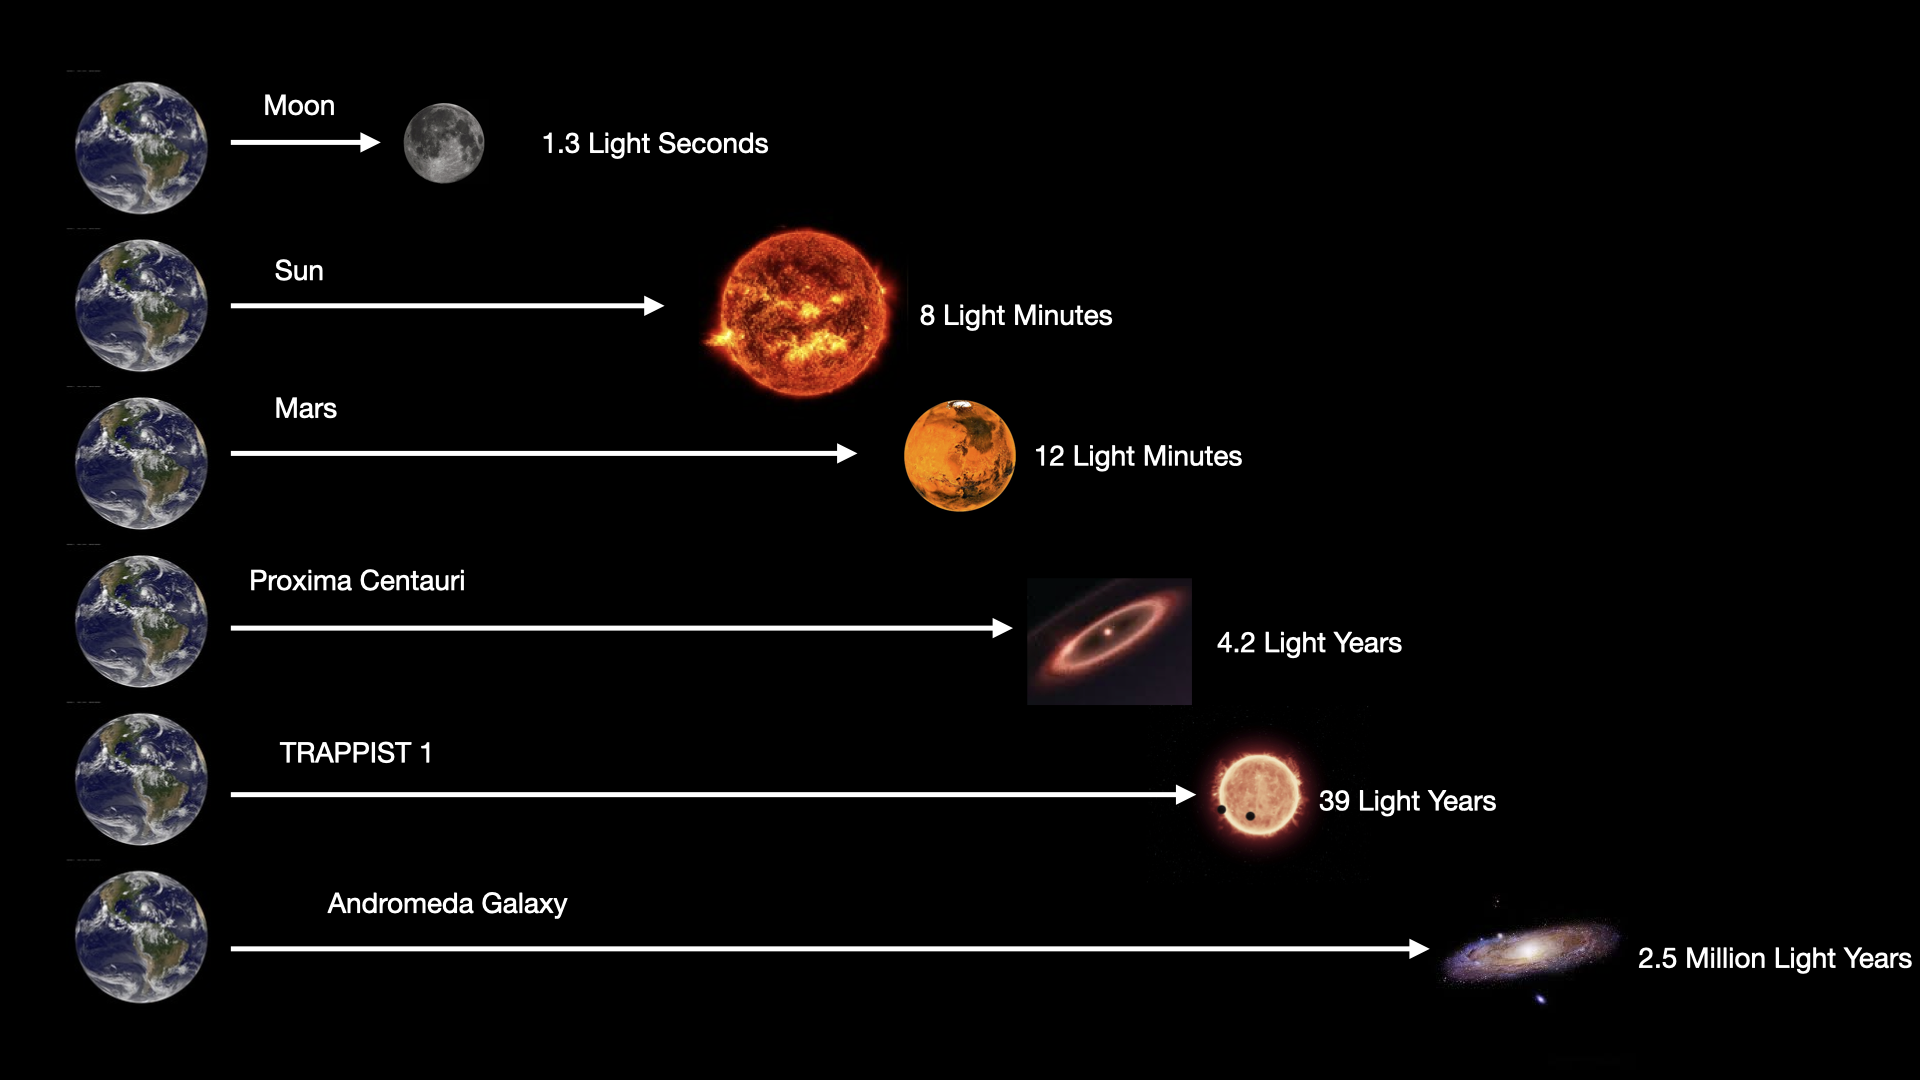 The distance in light units from the Earth to various celestial locations is given. In brief: to the Moon 1.3 light seconds, the Sun 8 light minutes, Mars 12 light minutes, Proxima Centauri 4.2 light years, TRAPPIST-1 planetary system 39 light years, Andromeda Galaxy 2.5 million light years.